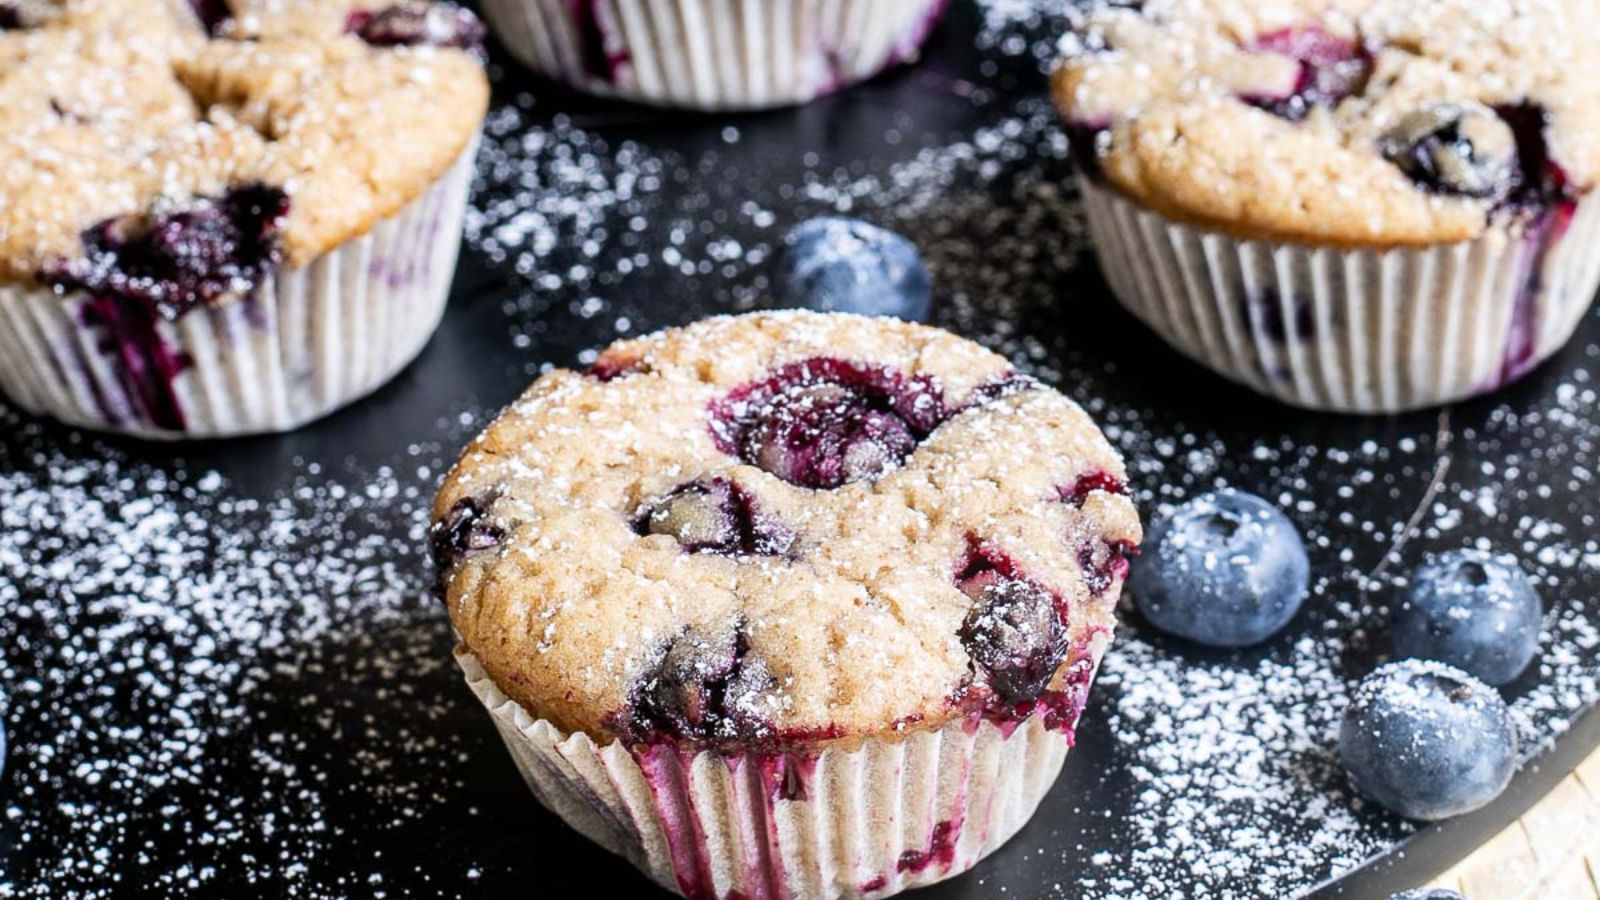 Sweet Made Simple: 10 Effortless Desserts for Quick and Easy Indulgence